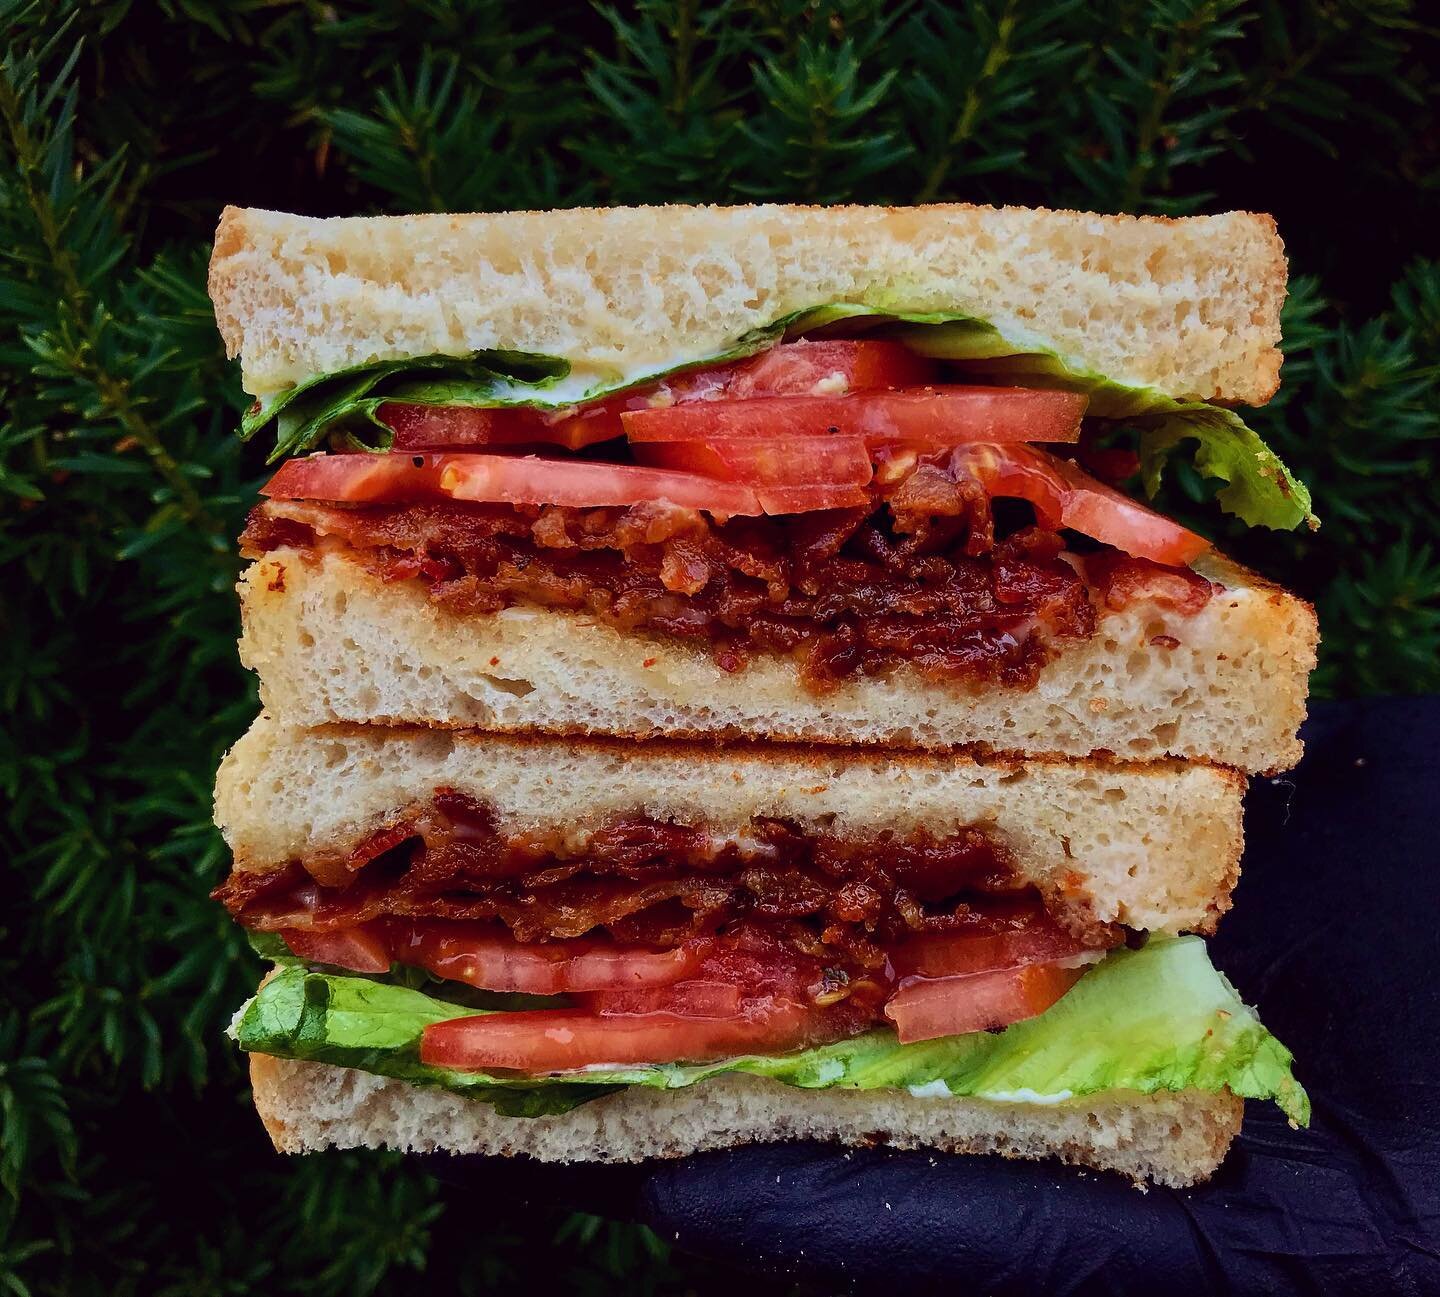 #tbt &amp; let the nostalgia kick in on this #NationalBLTDay 🥪 We&rsquo;re serving up the CLASSIC BLT: Bacon, lettuce, tomato, mayo, and salt &amp; pepper on toasted Appalachian bread!
&bull;
Open until 3:00 today for online orders ( Lolasdelicatess